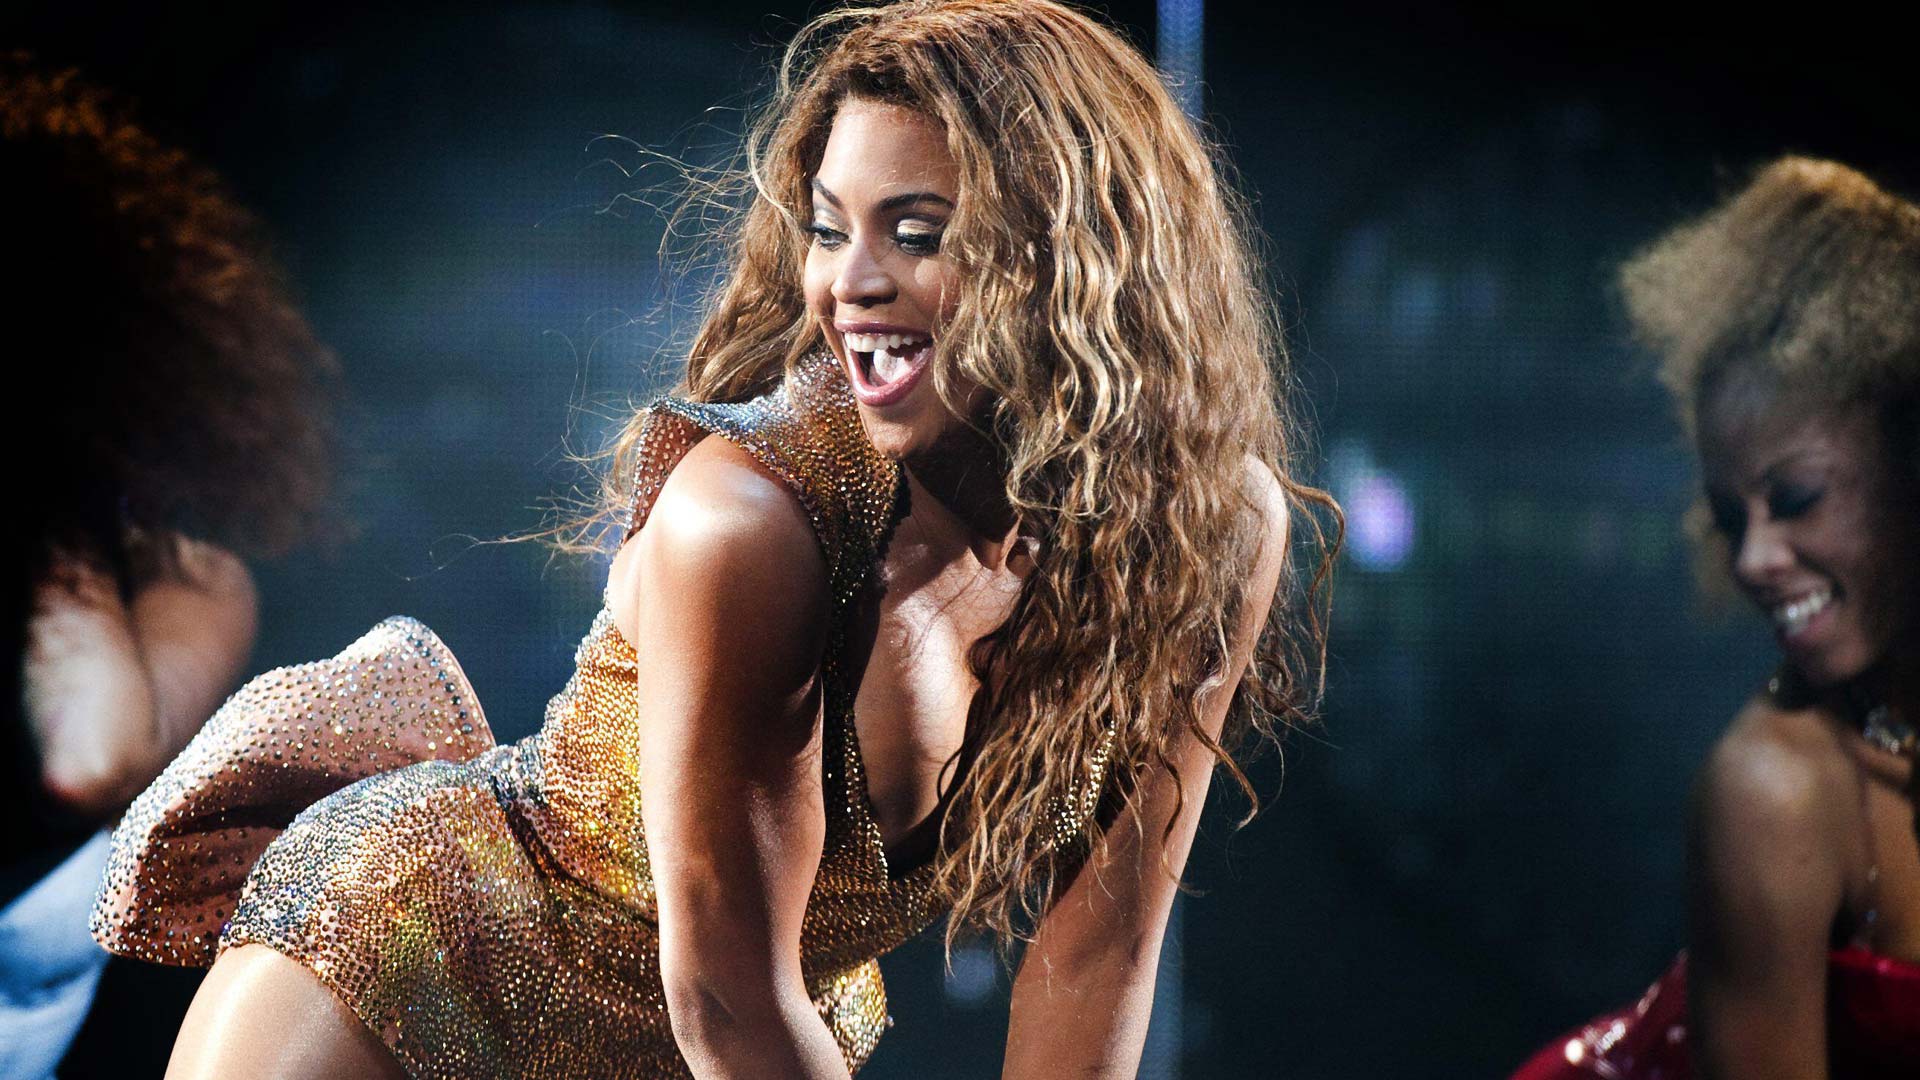 Beyonce dancing in a golden outfit at her concert